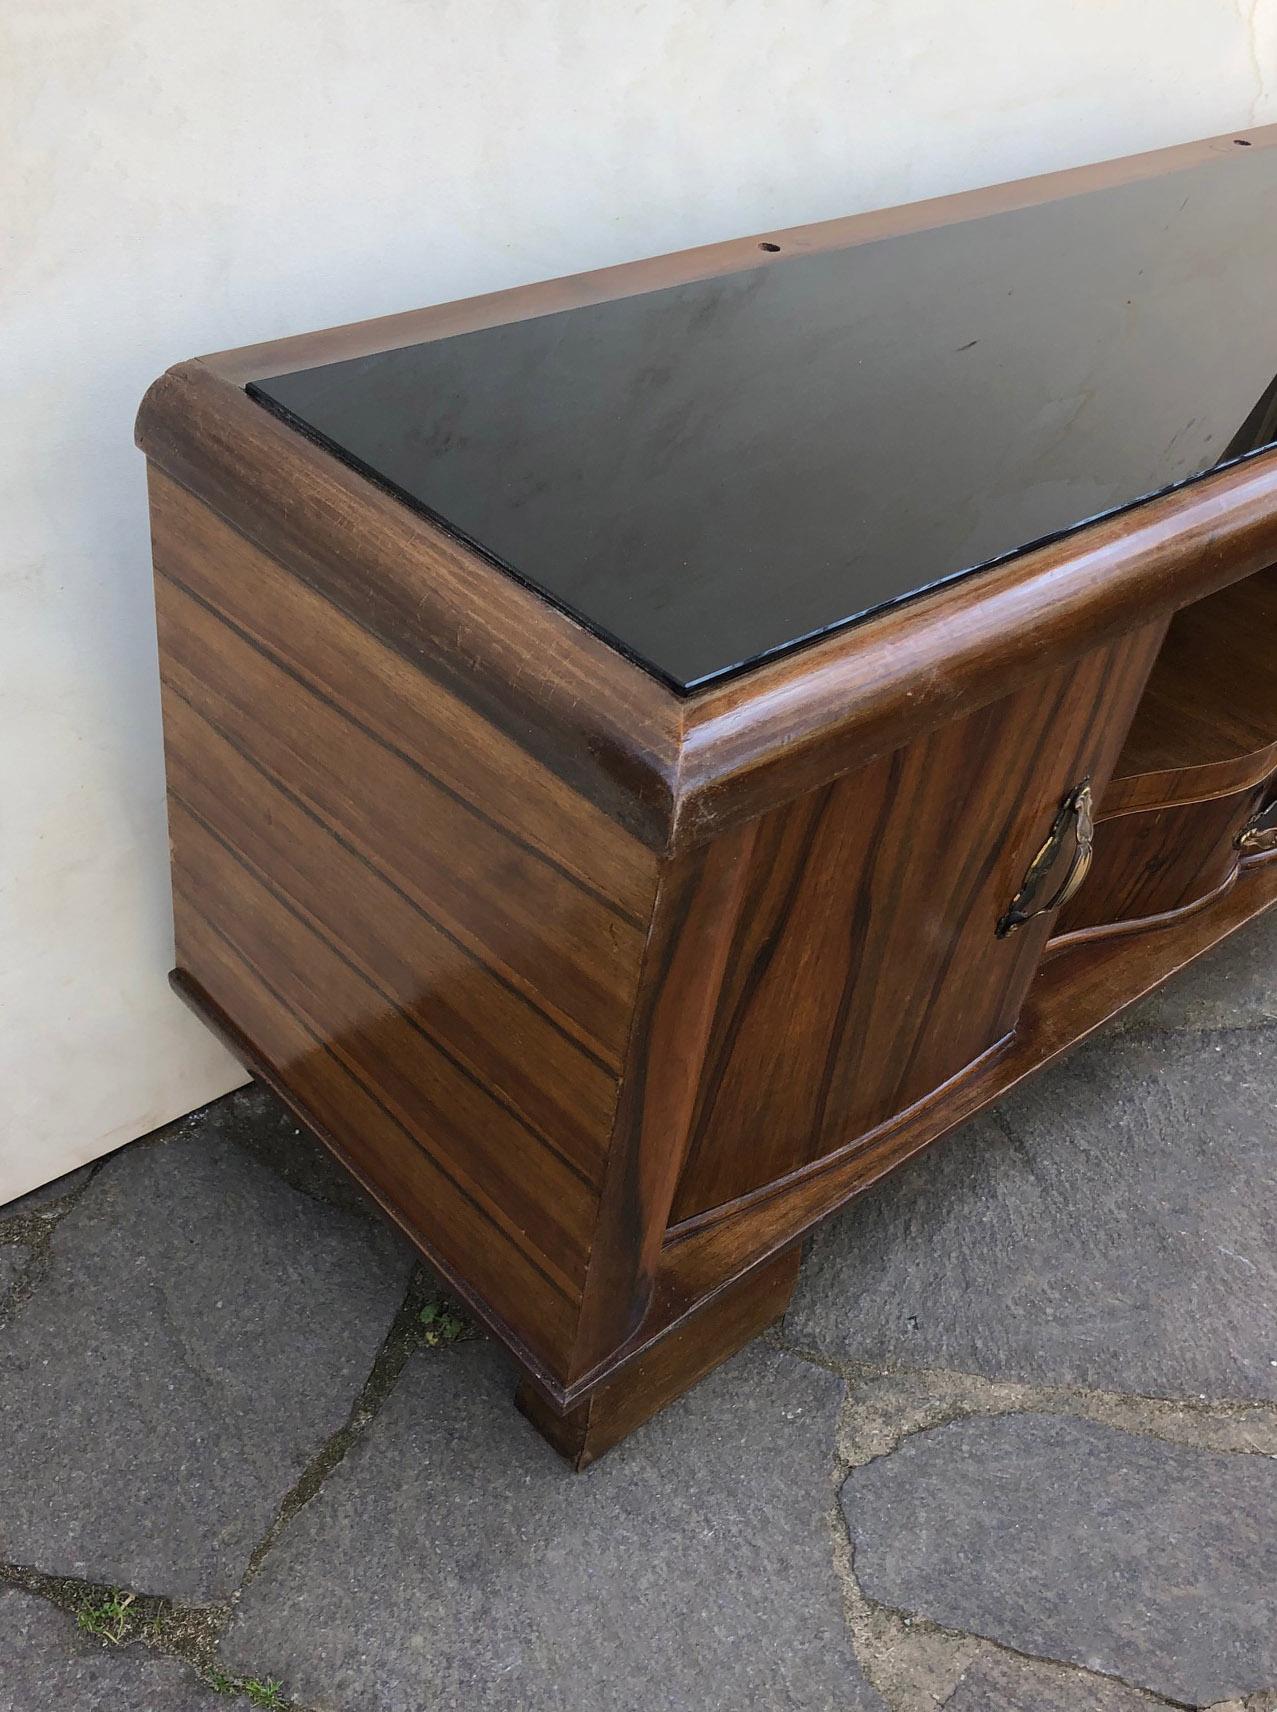 1940s Sideboard Rosewood Walnut Honeycomb Natural Color Italian Design Mirror In Good Condition For Sale In Buggiano, IT